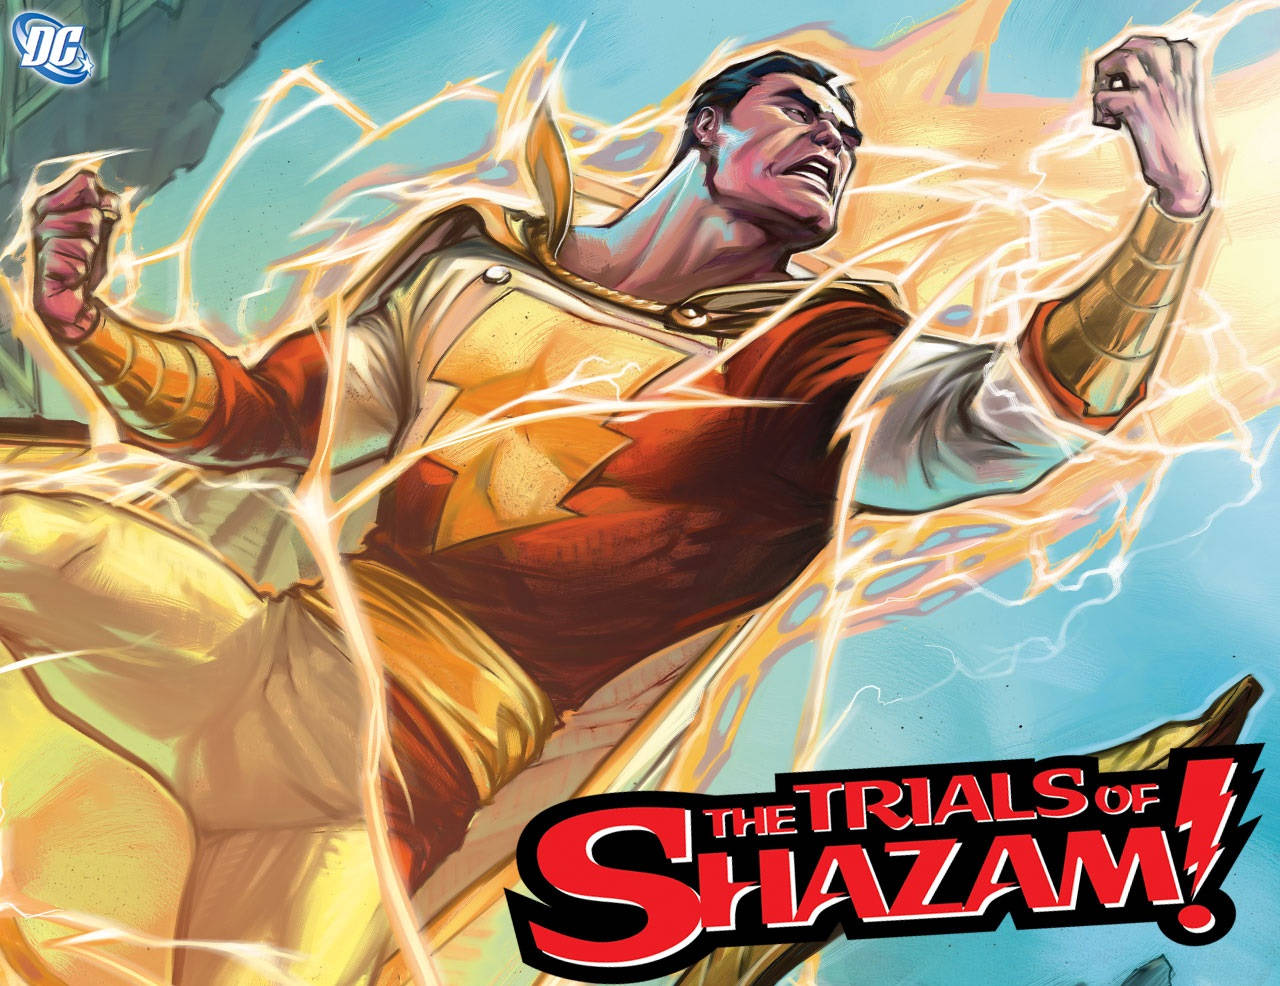 The Trials of Shazam: The Complete Series Wallpaper